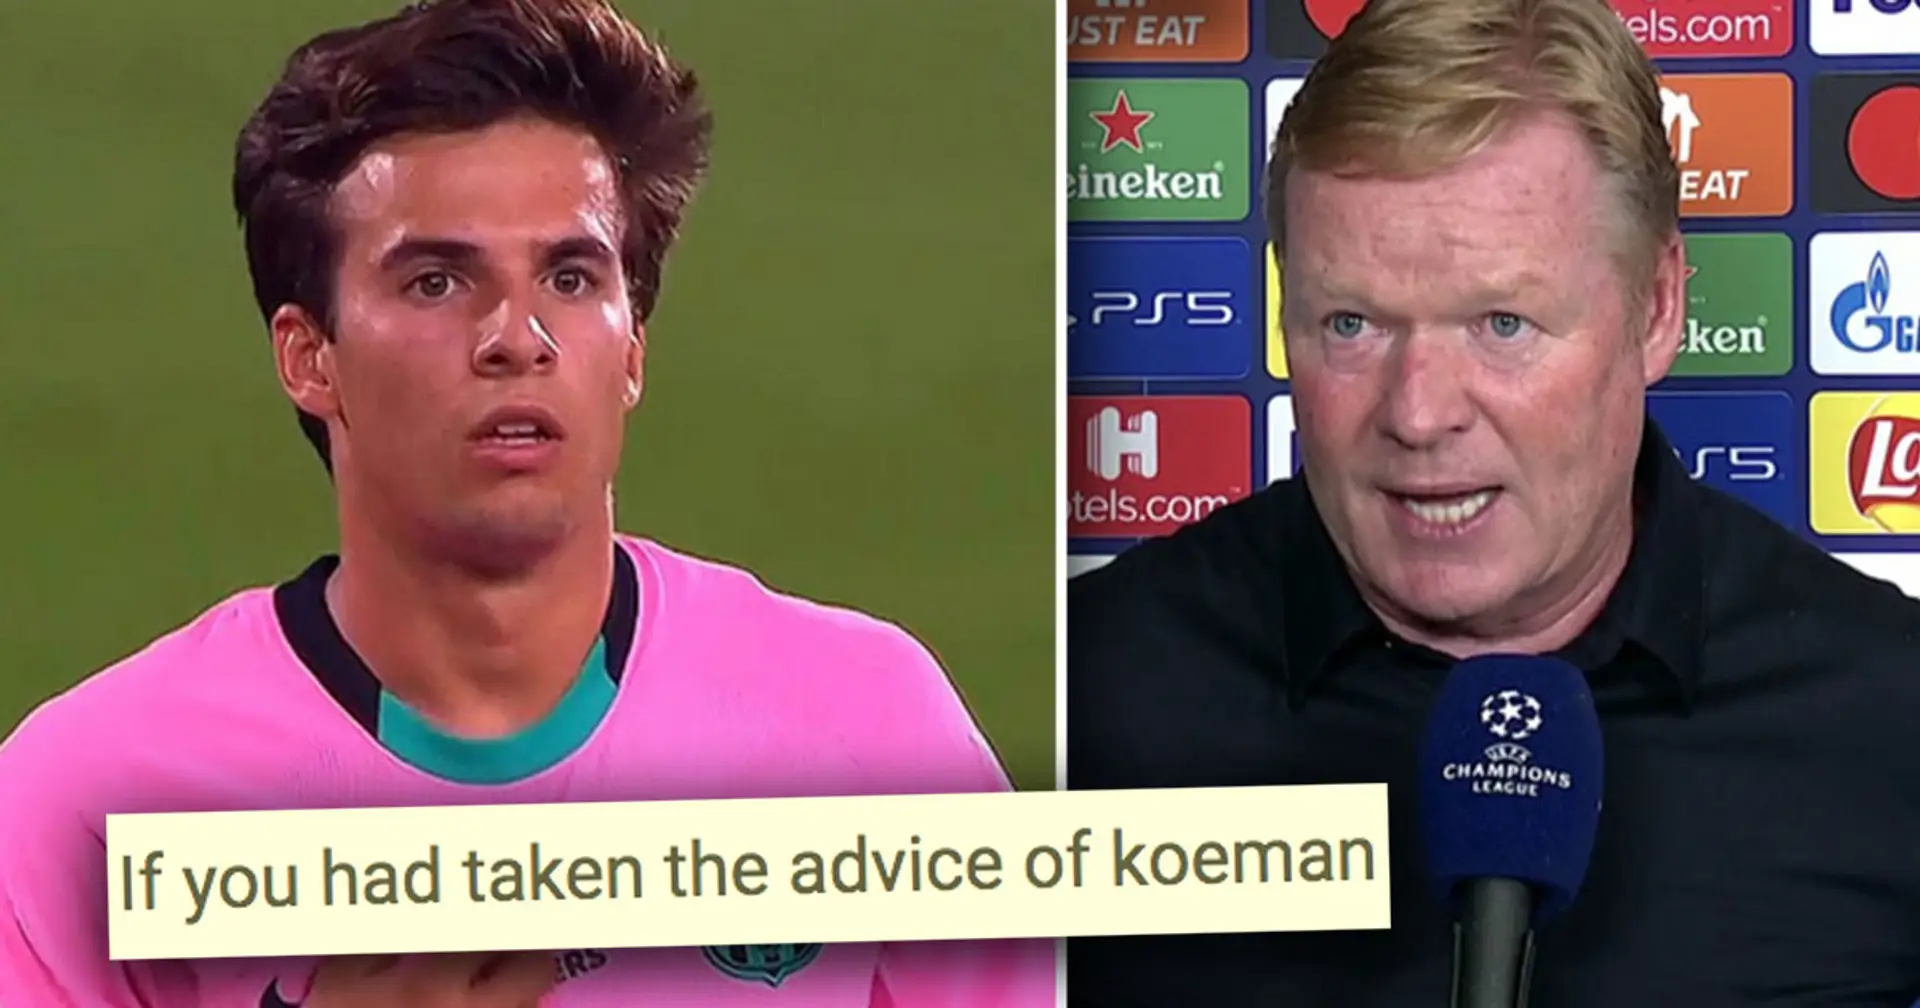 'You would've been one of our best midfielders': Fan blames Riqui Puig for ignoring Koeman's special advice